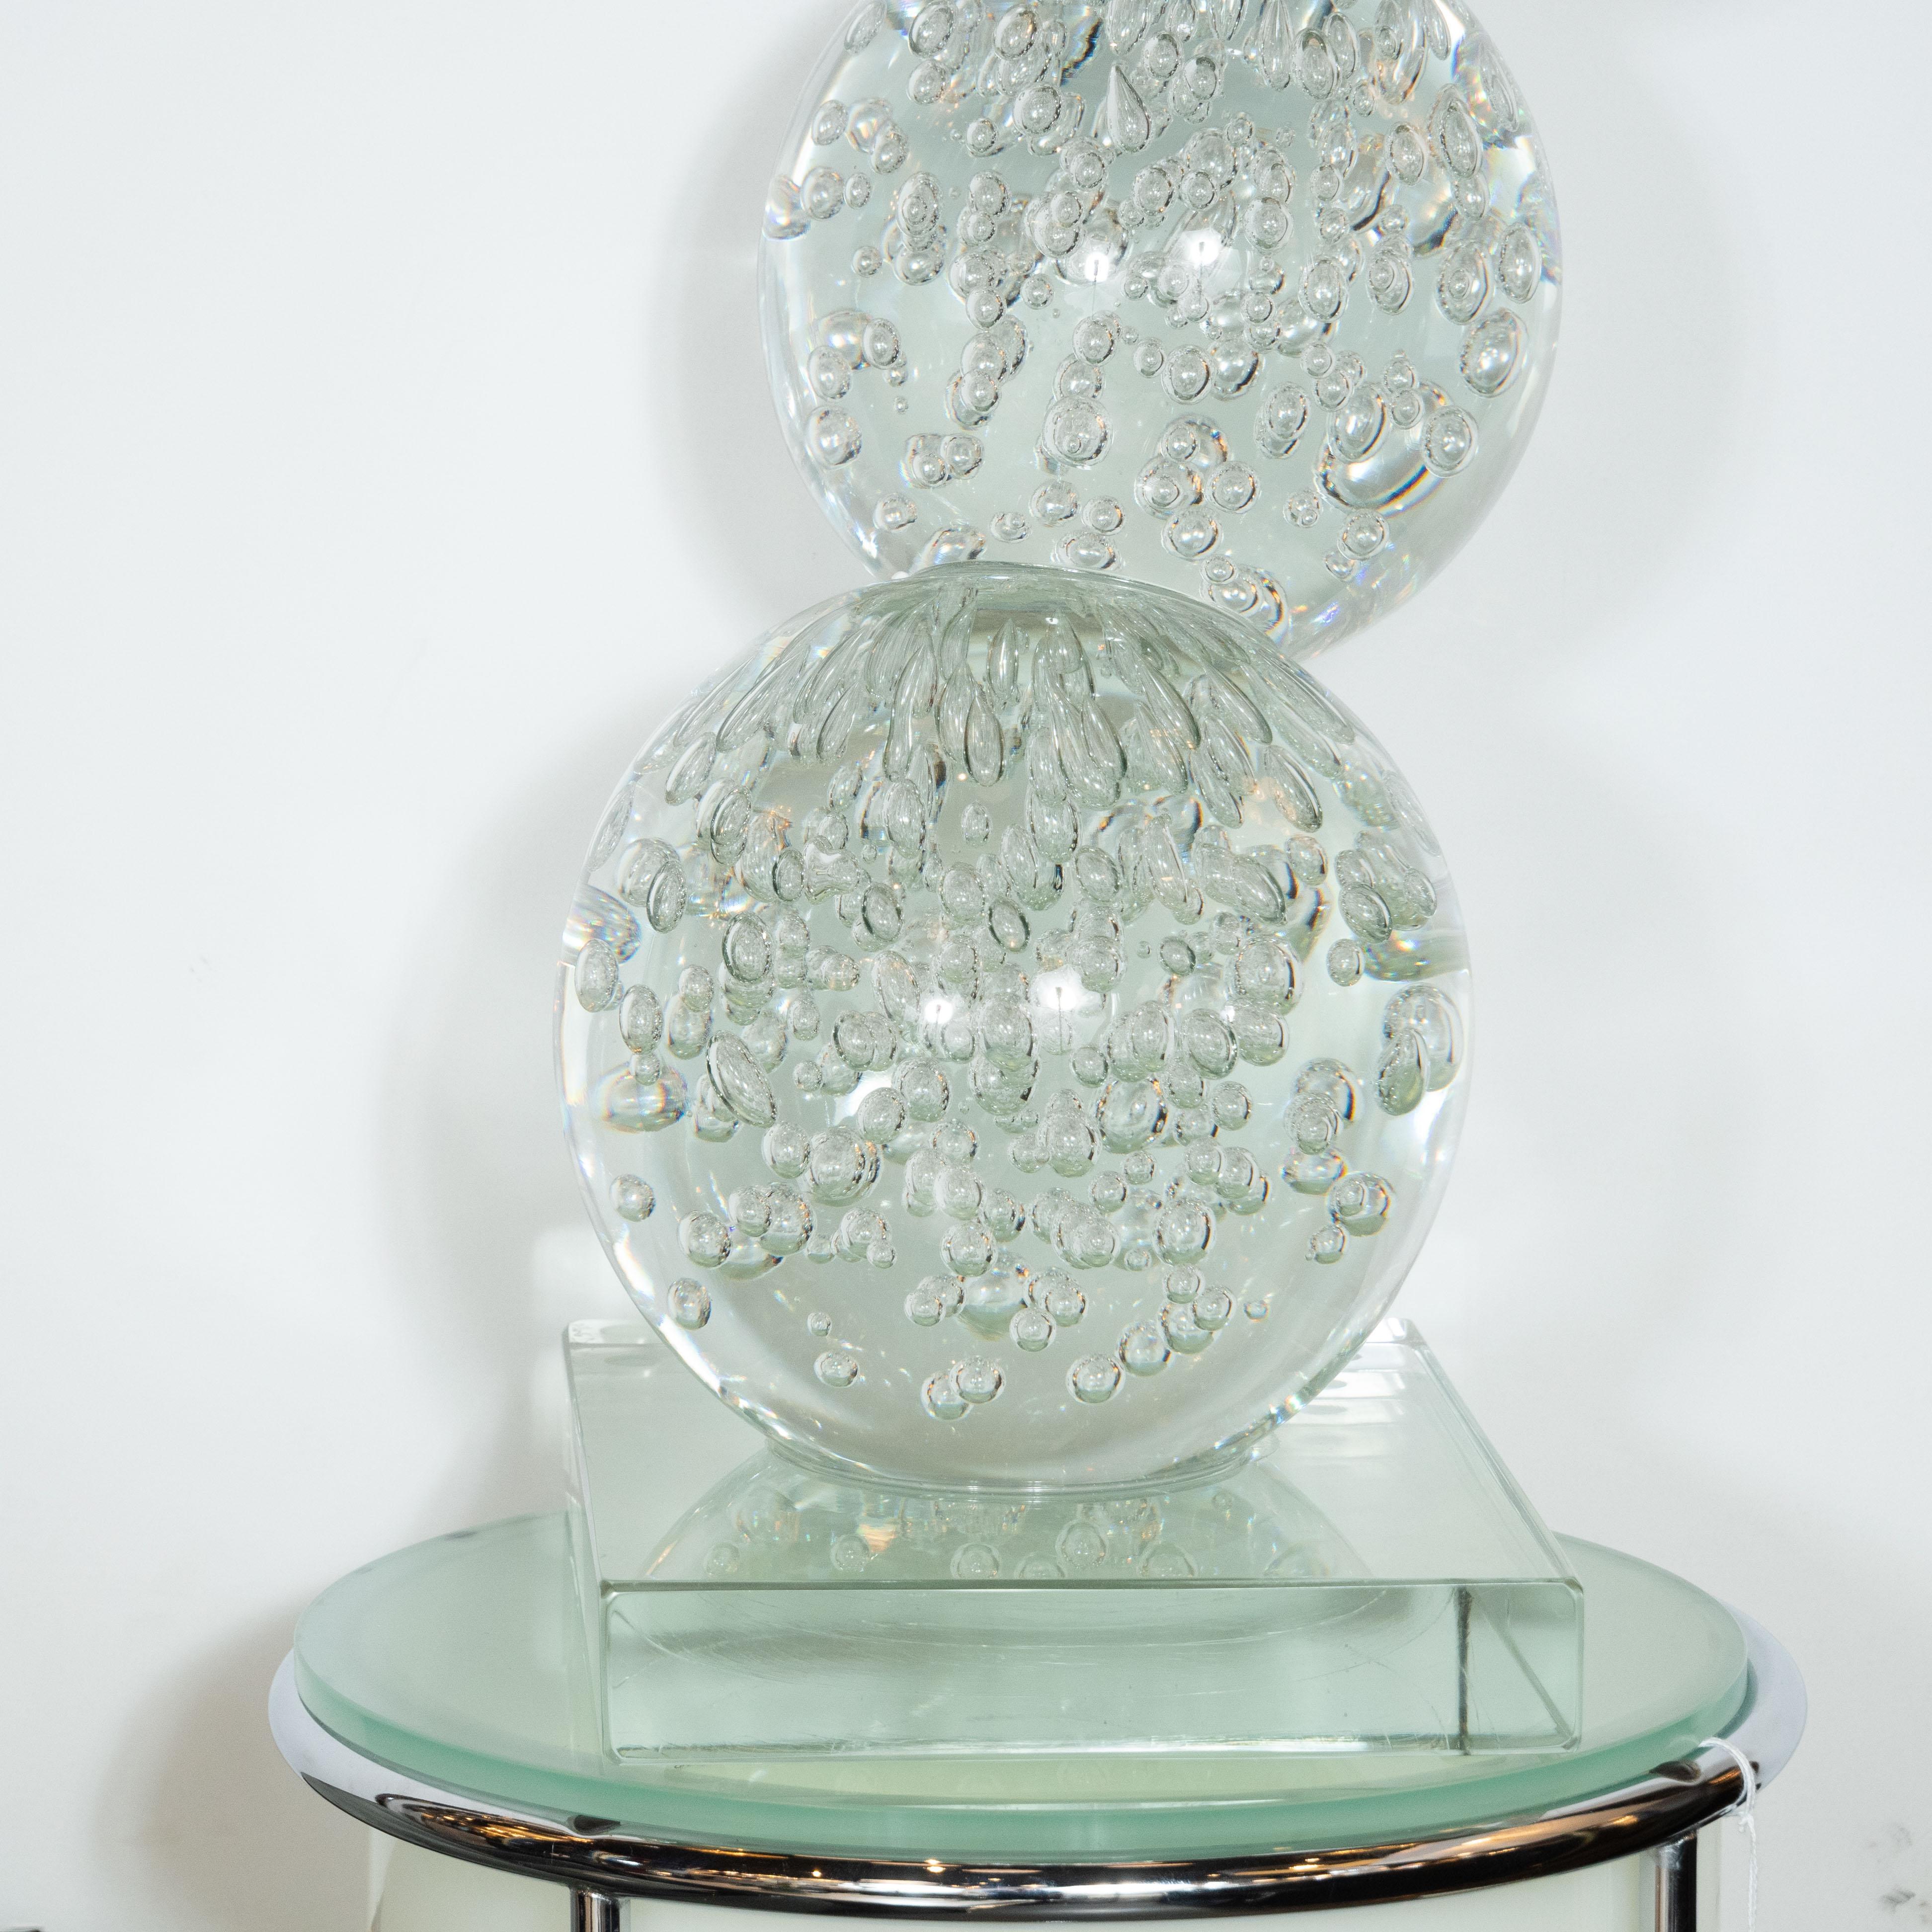 This sophisticated modernist sculpture was hand blown in Murano, Italy- the island off the coast of Venice renowned for its superlative glass production- exclusively for High Style Deco. It features five stacked translucent spherical forms that